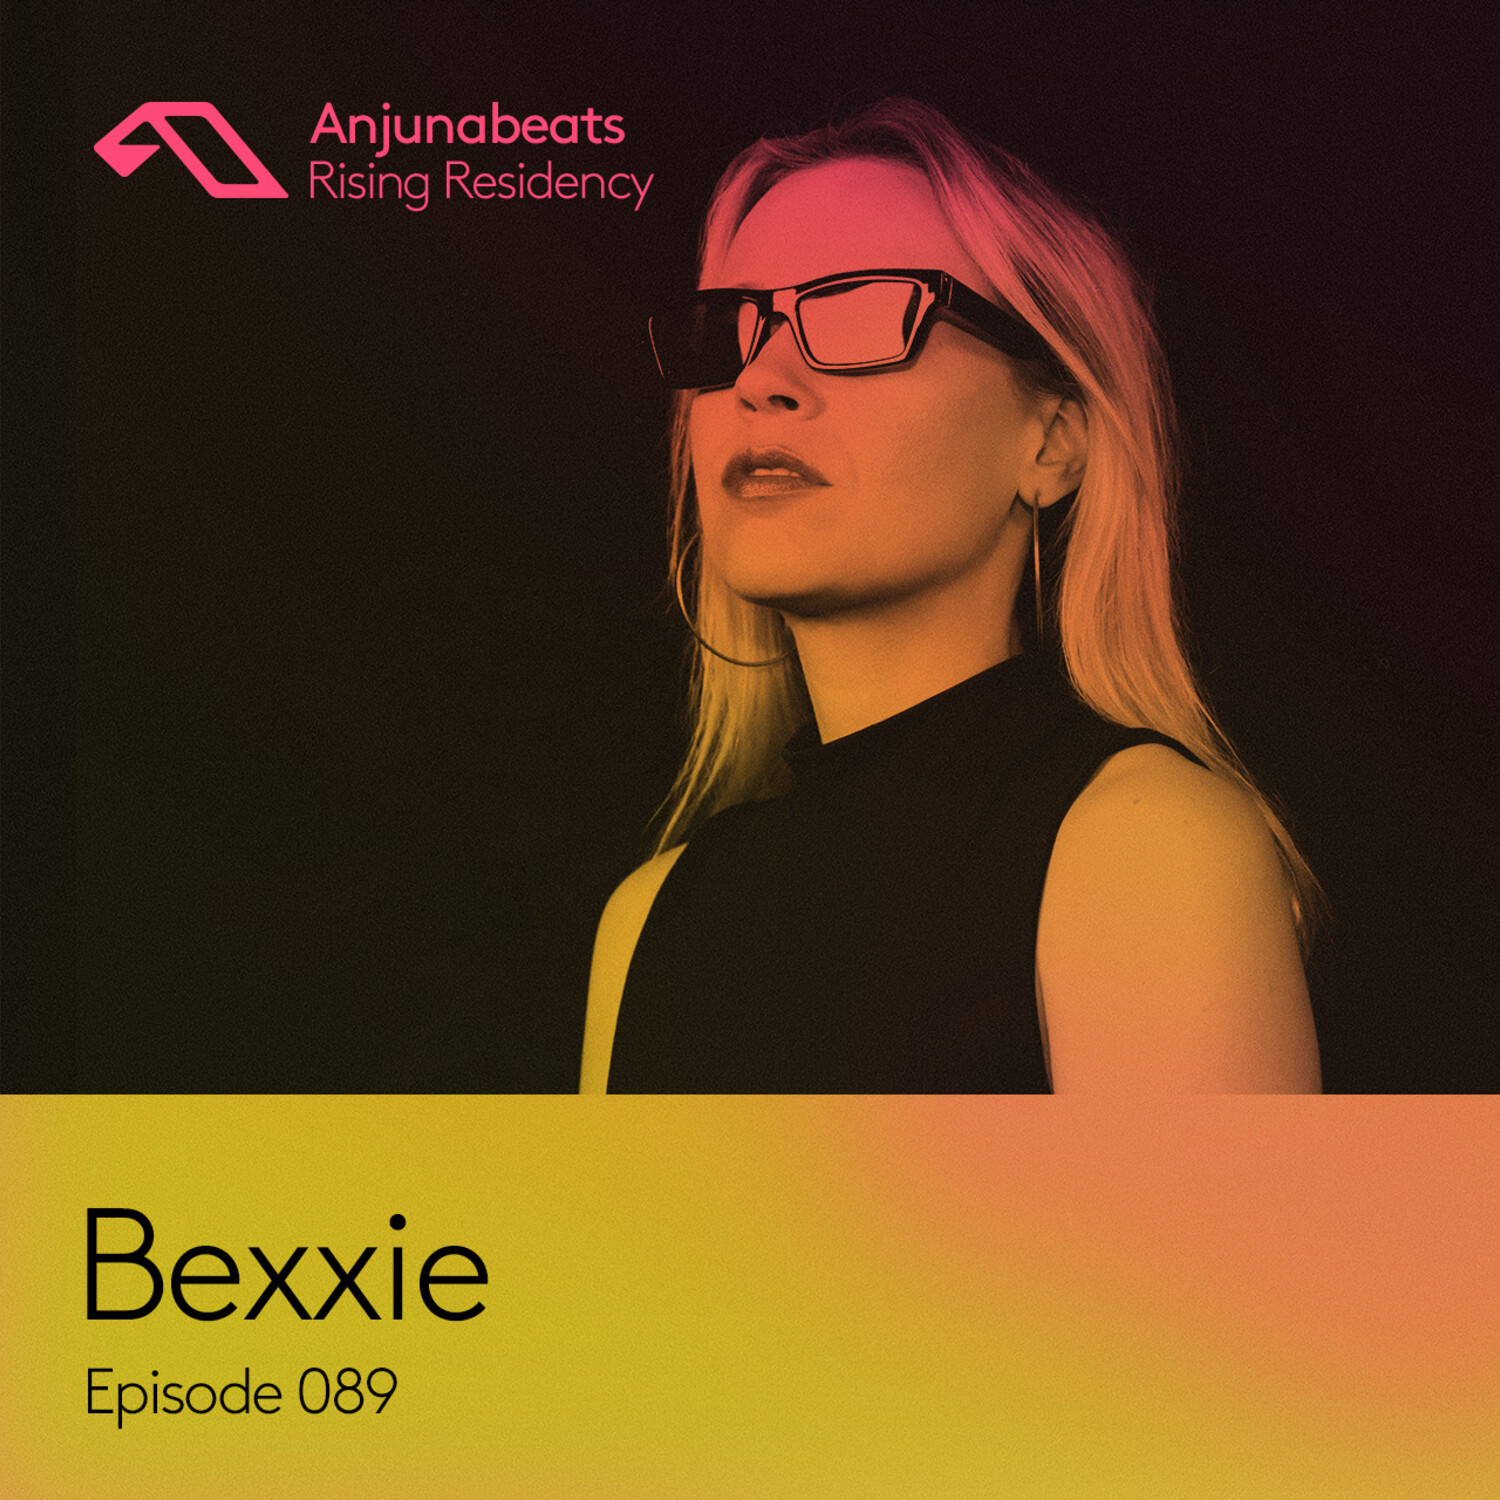 The Anjunabeats Rising Residency 089 with Bexxie